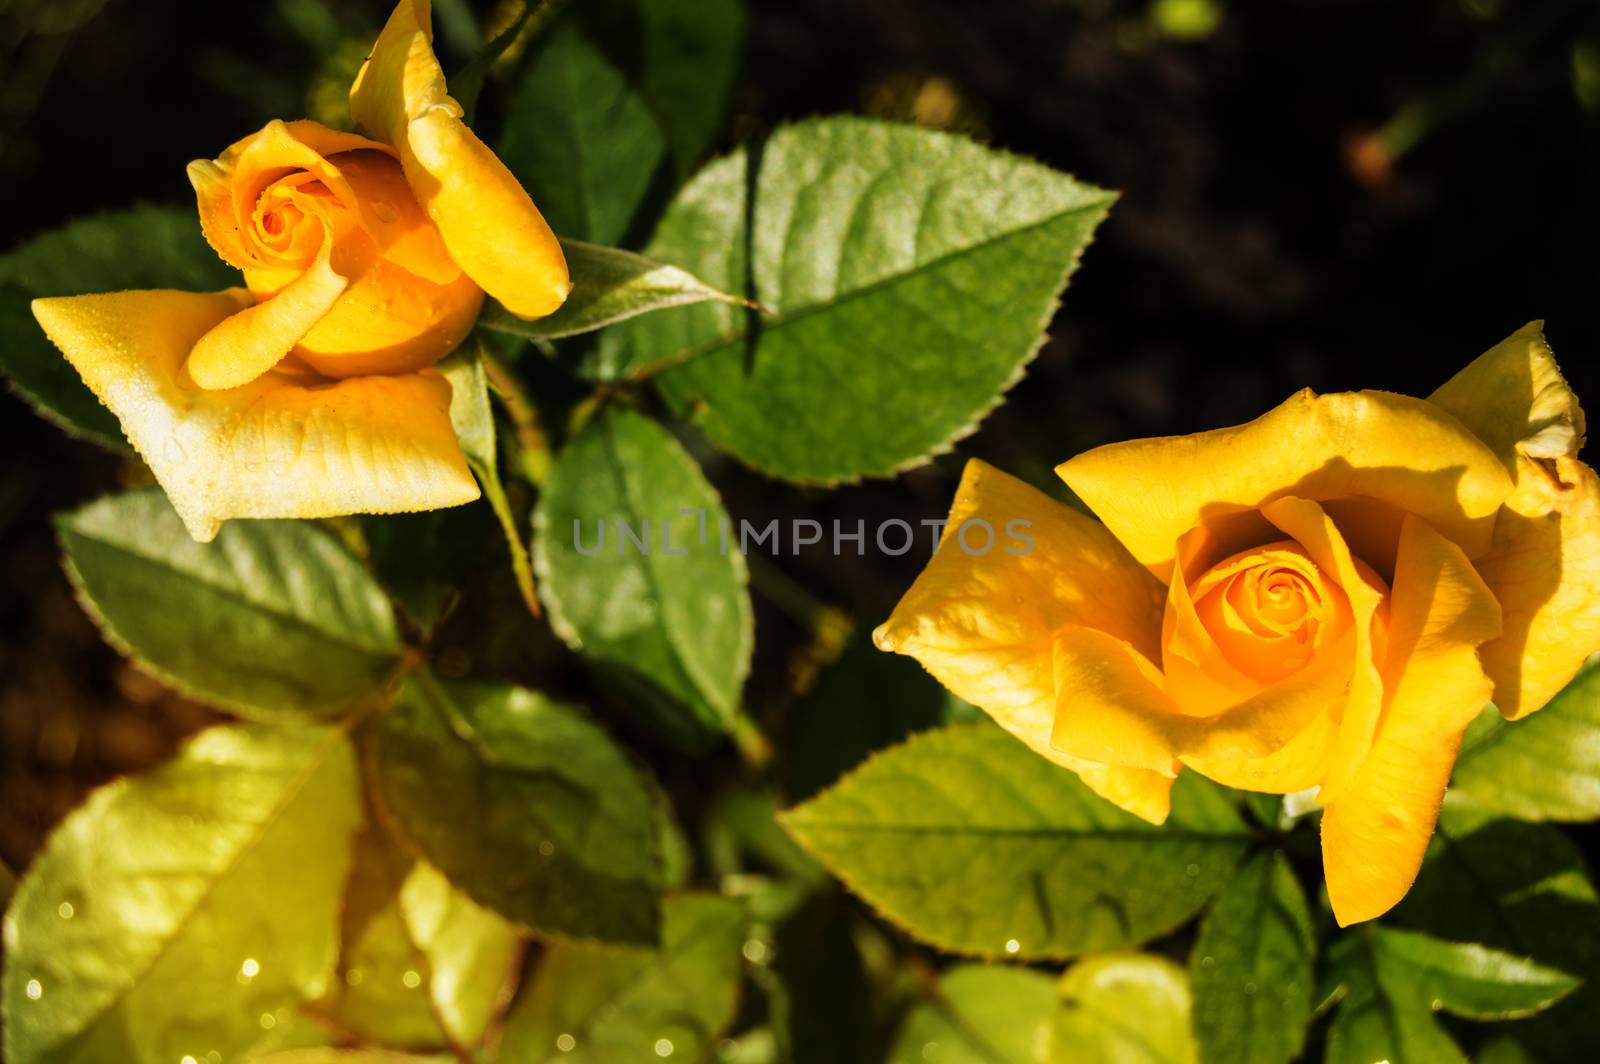 Two beautiful yellow roses blooming in a garden background of green leaves and stems, the concept of postcards.